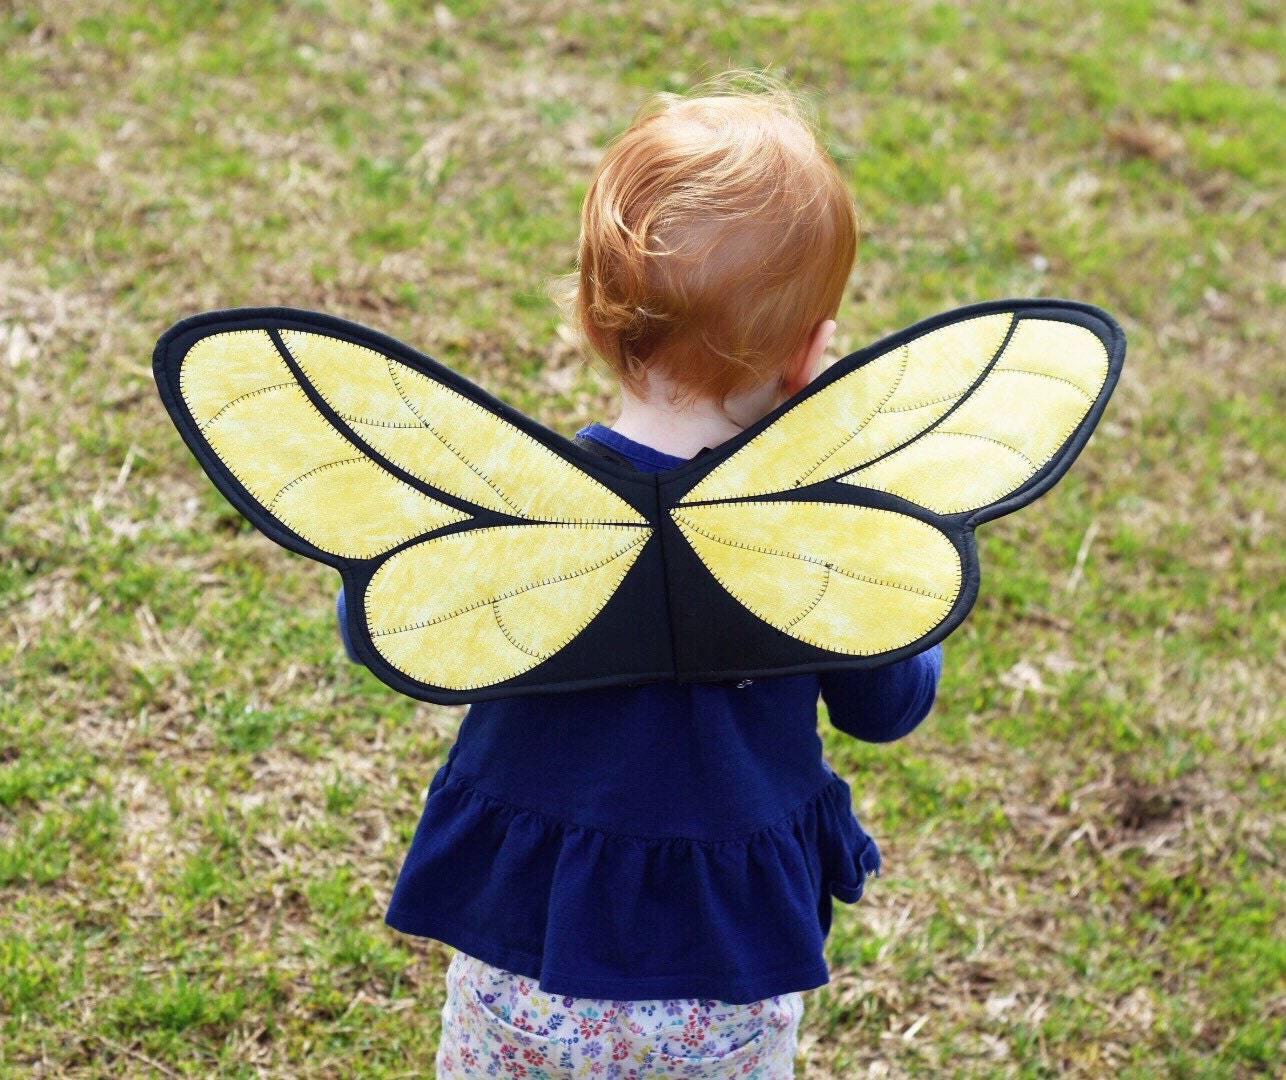 Funcredible Bumble Bee Costume Accessories Bee Wings and Bee